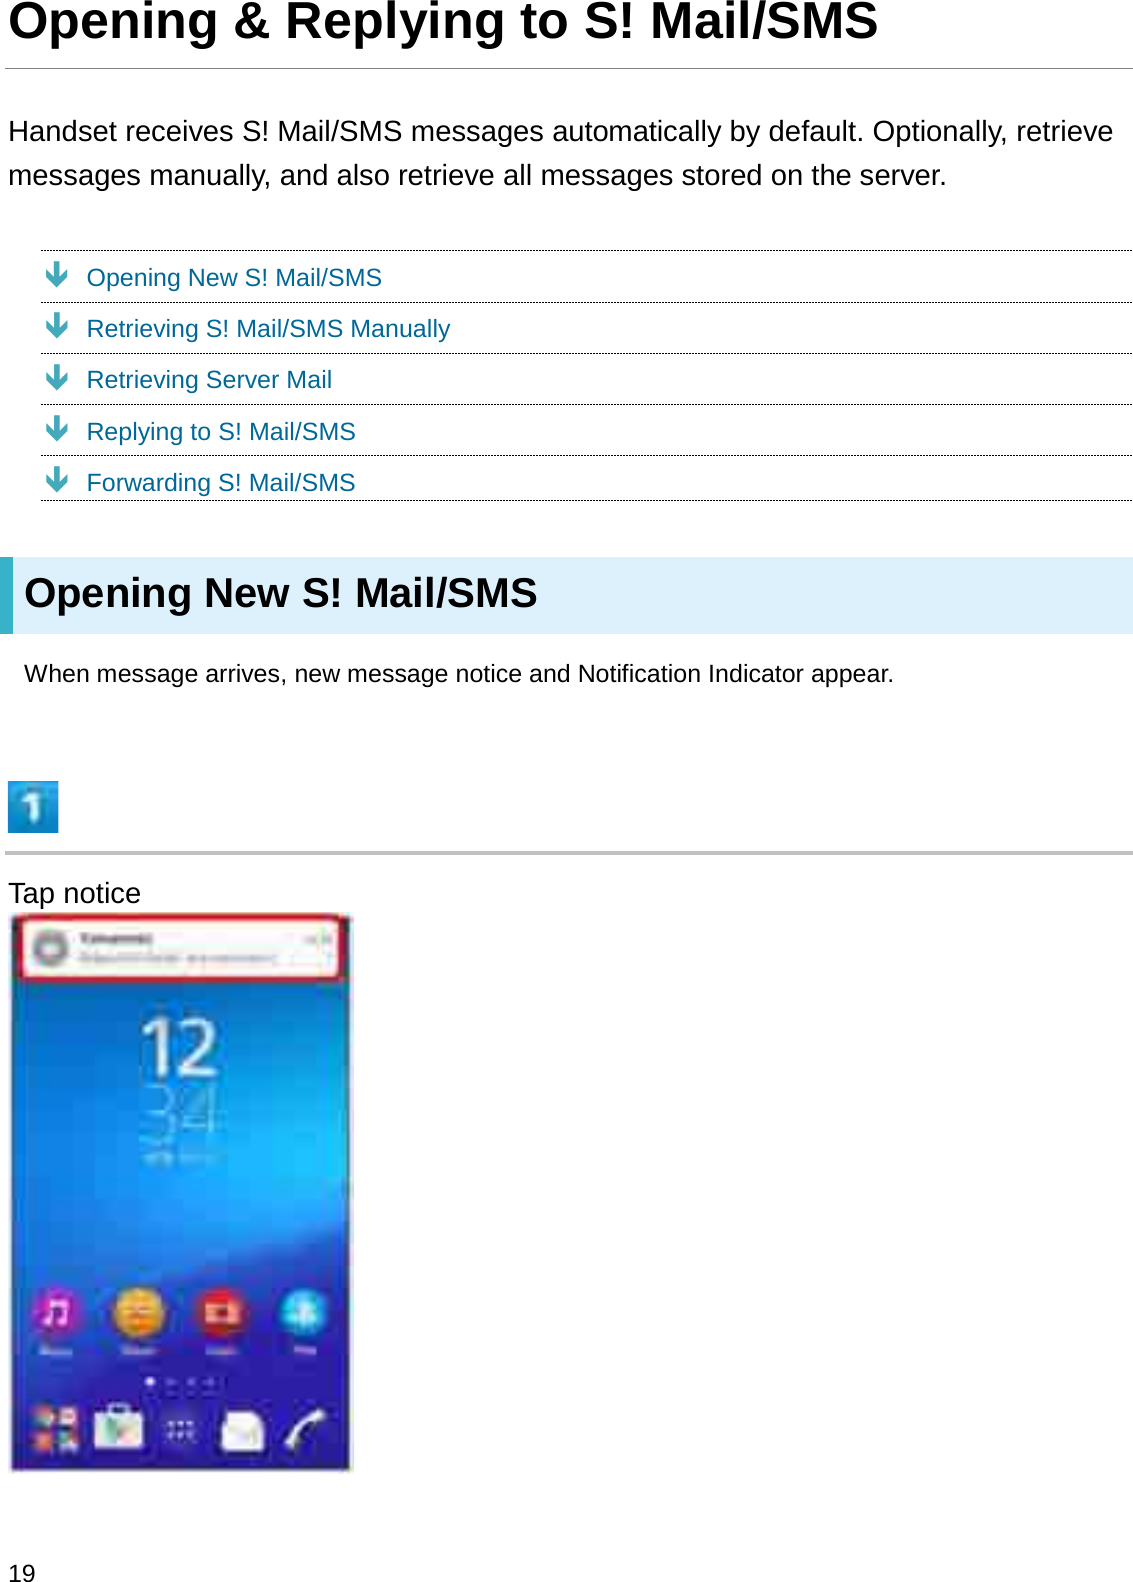 Opening &amp; Replying to S! Mail/SMSHandset receives S! Mail/SMS messages automatically by default. Optionally, retrieve messages manually, and also retrieve all messages stored on the server.ÐOpening New S! Mail/SMSÐRetrieving S! Mail/SMS ManuallyÐRetrieving Server MailÐReplying to S! Mail/SMSÐForwarding S! Mail/SMSOpening New S! Mail/SMSWhen message arrives, new message notice and Notification Indicator appear.Tap notice19